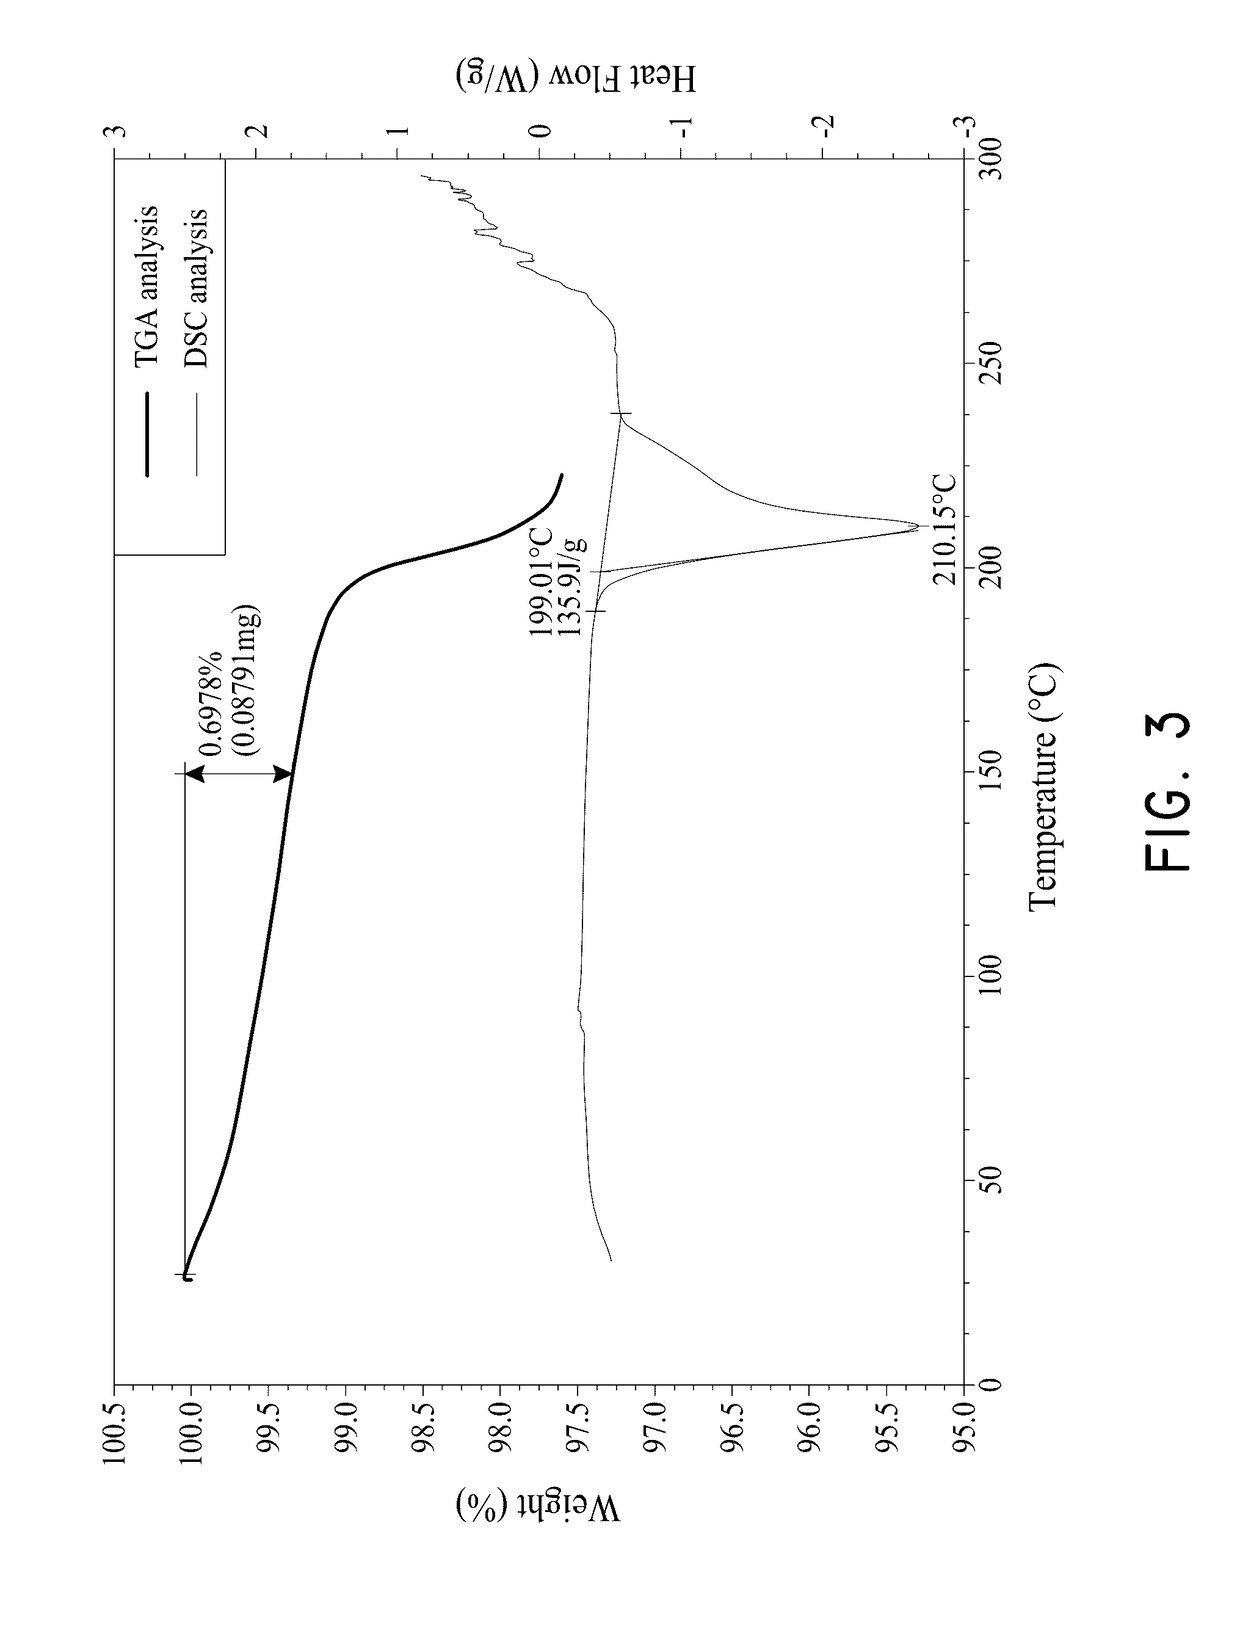 Salts and polymorphs of cyclic boronic acid ester derivatives and therapeutic uses thereof